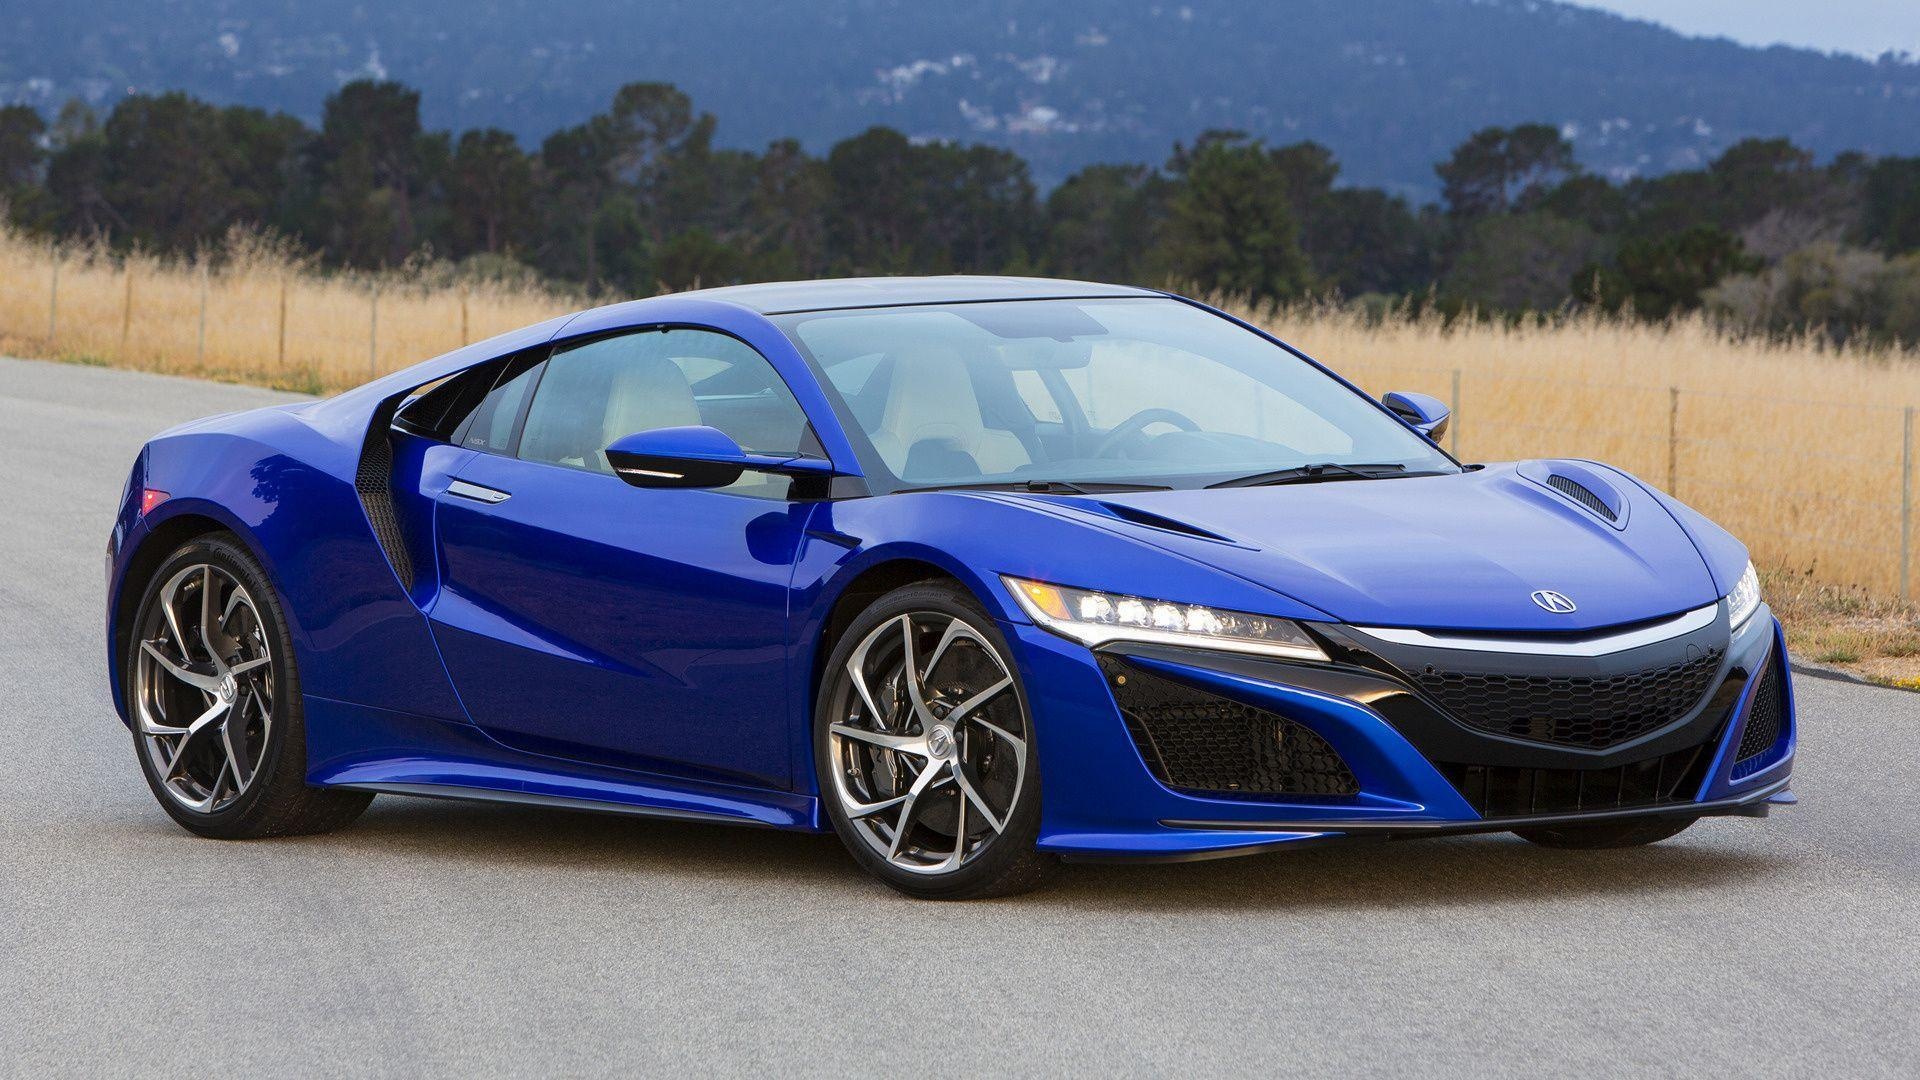 Acura NSX, Blue NSX, Top free backgrounds, High quality, 1920x1080 Full HD Desktop